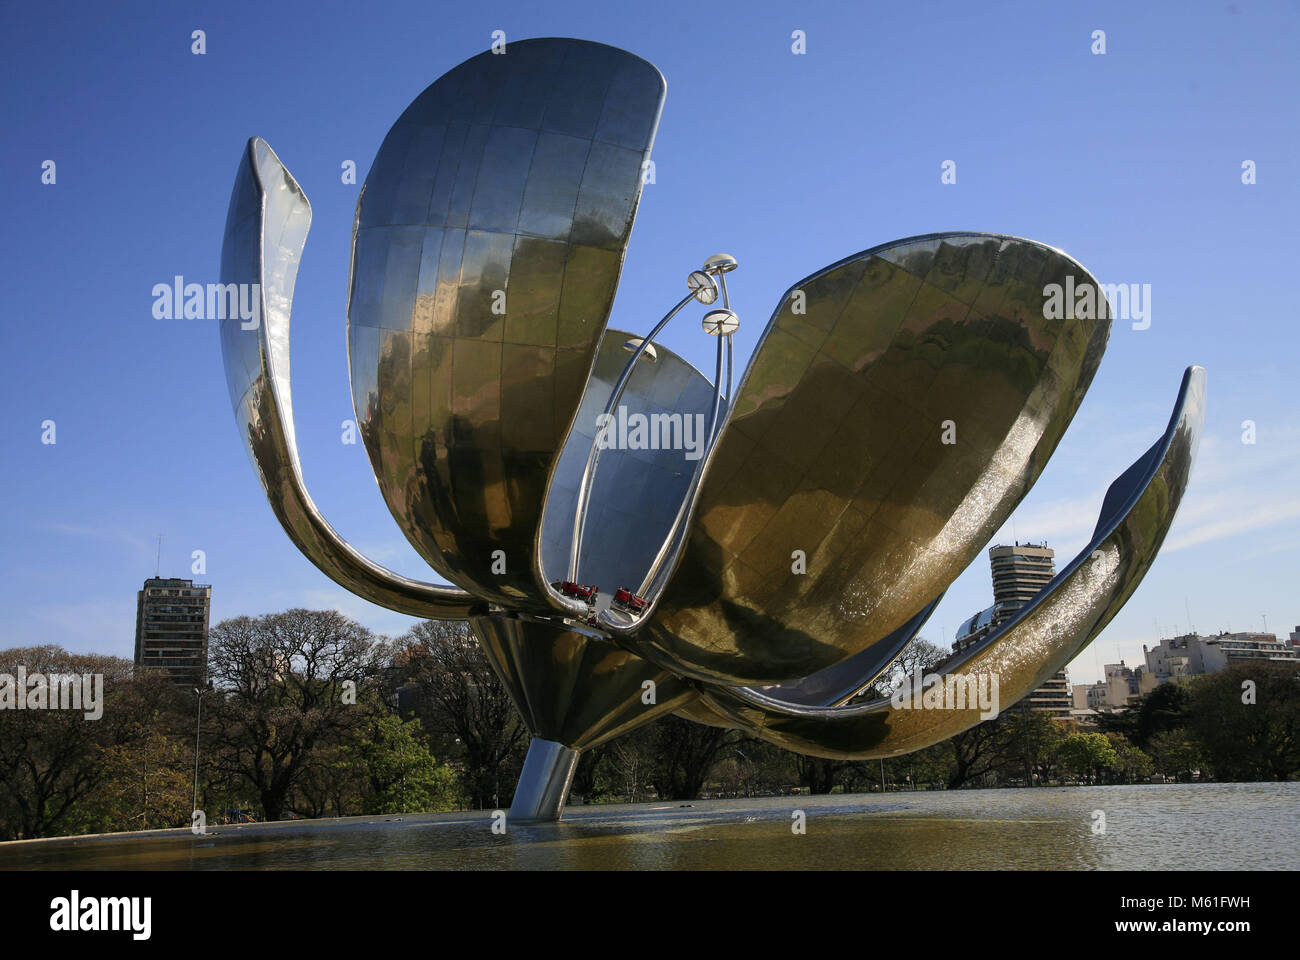 The giant aluminum and steel flower Floralis Generica sculpture by Eduardo Catalano in the Recoleta neighborhood of Buenos Aires, Argentina. Stock Photo